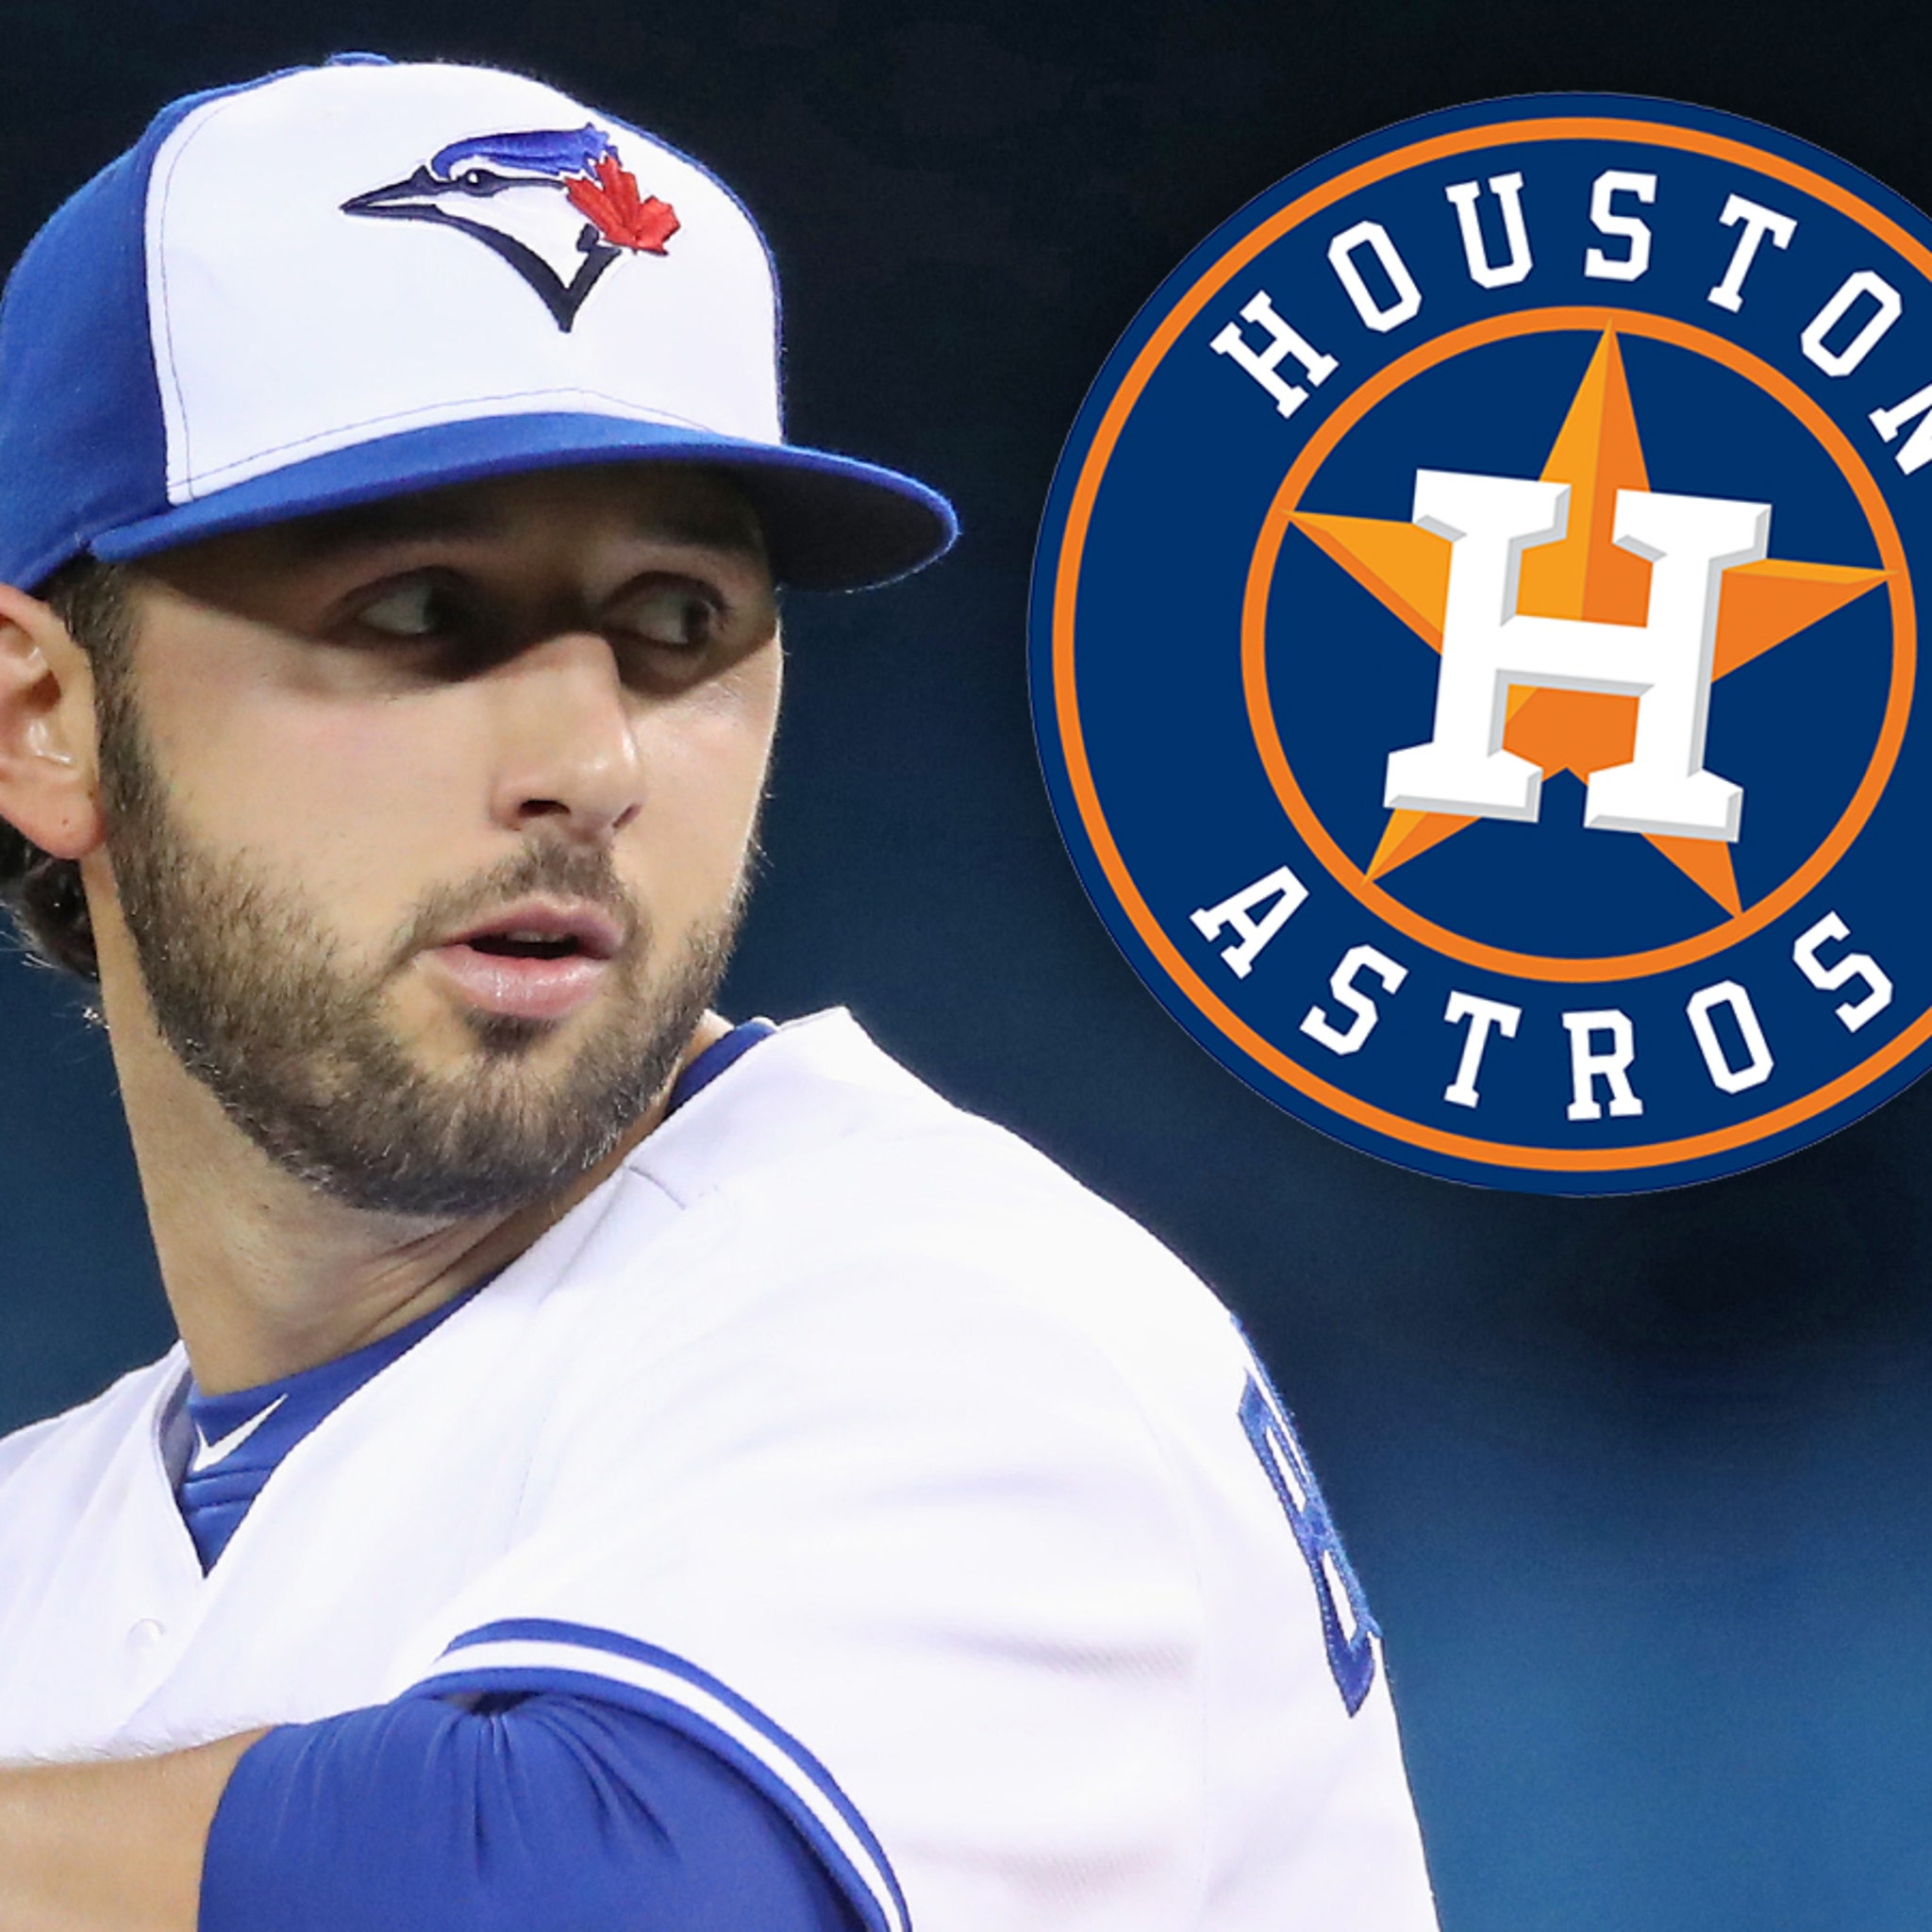 Ex-MLB Pitcher Sues Astros Over Cheating Scandal, You Ruined My